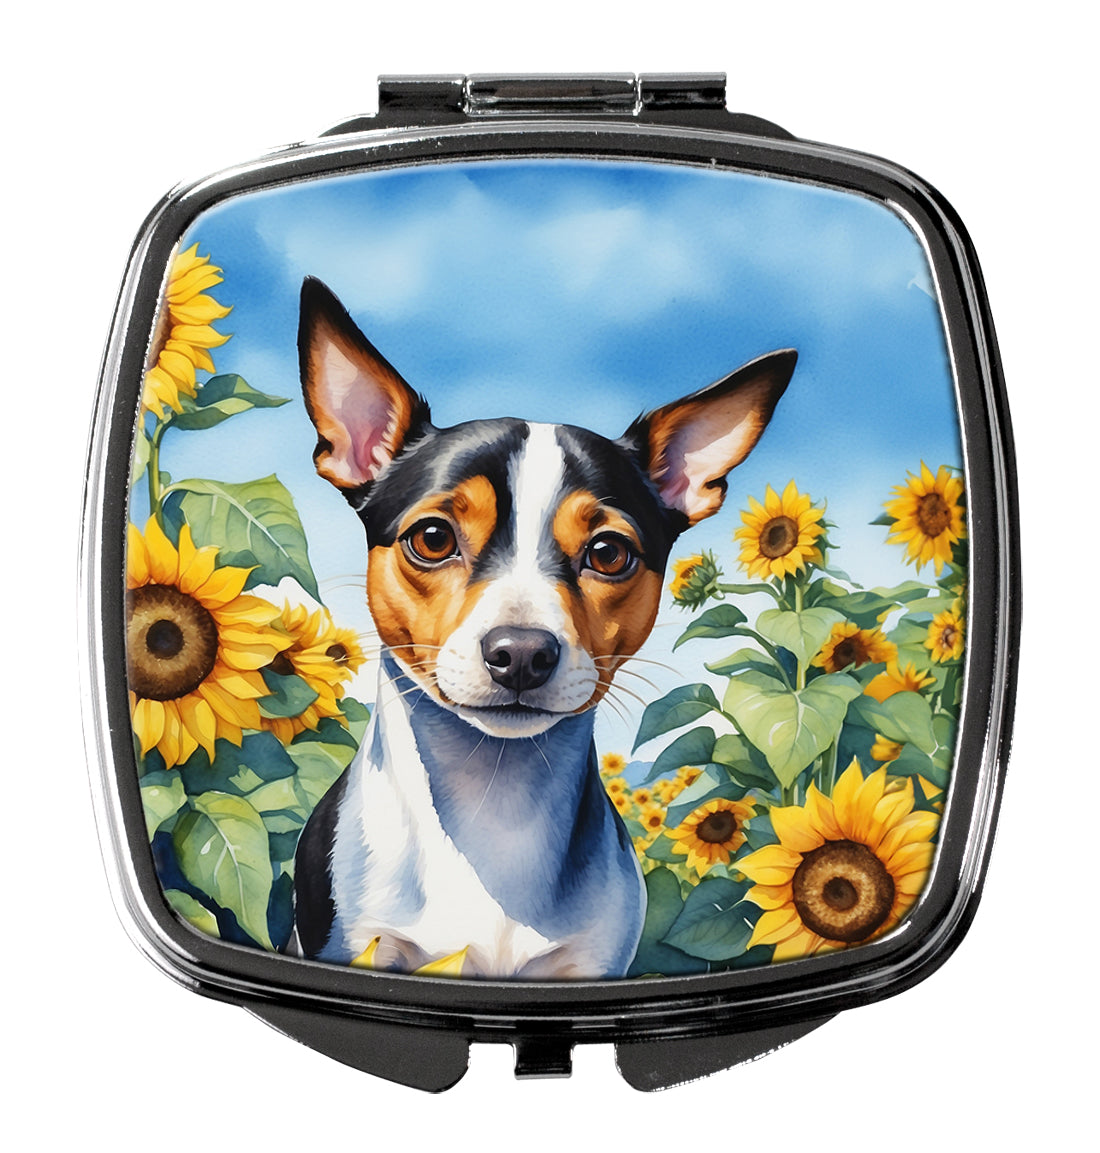 Buy this Rat Terrier in Sunflowers Compact Mirror